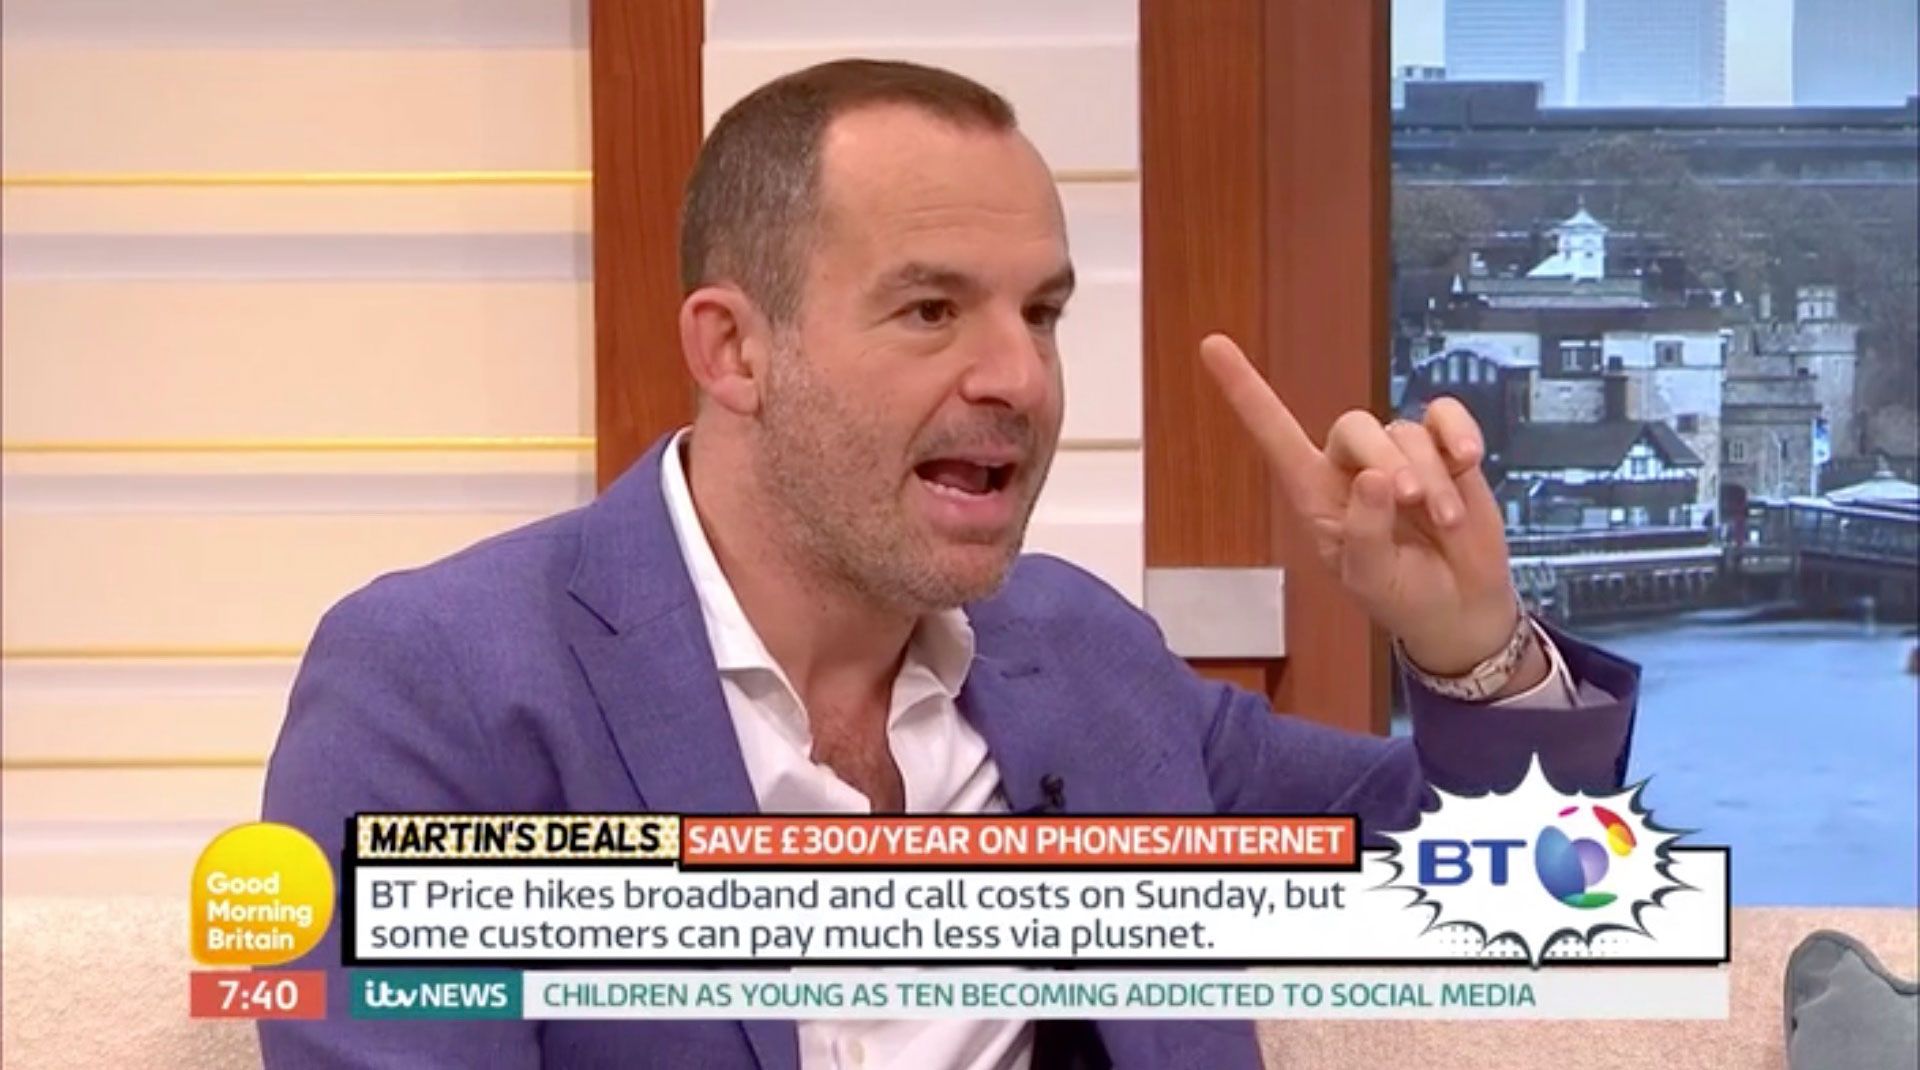 Money Saving Expert S Martin Lewis Reveals How To Beat The Bt Price Increase And Save 350 A Year With This Trick